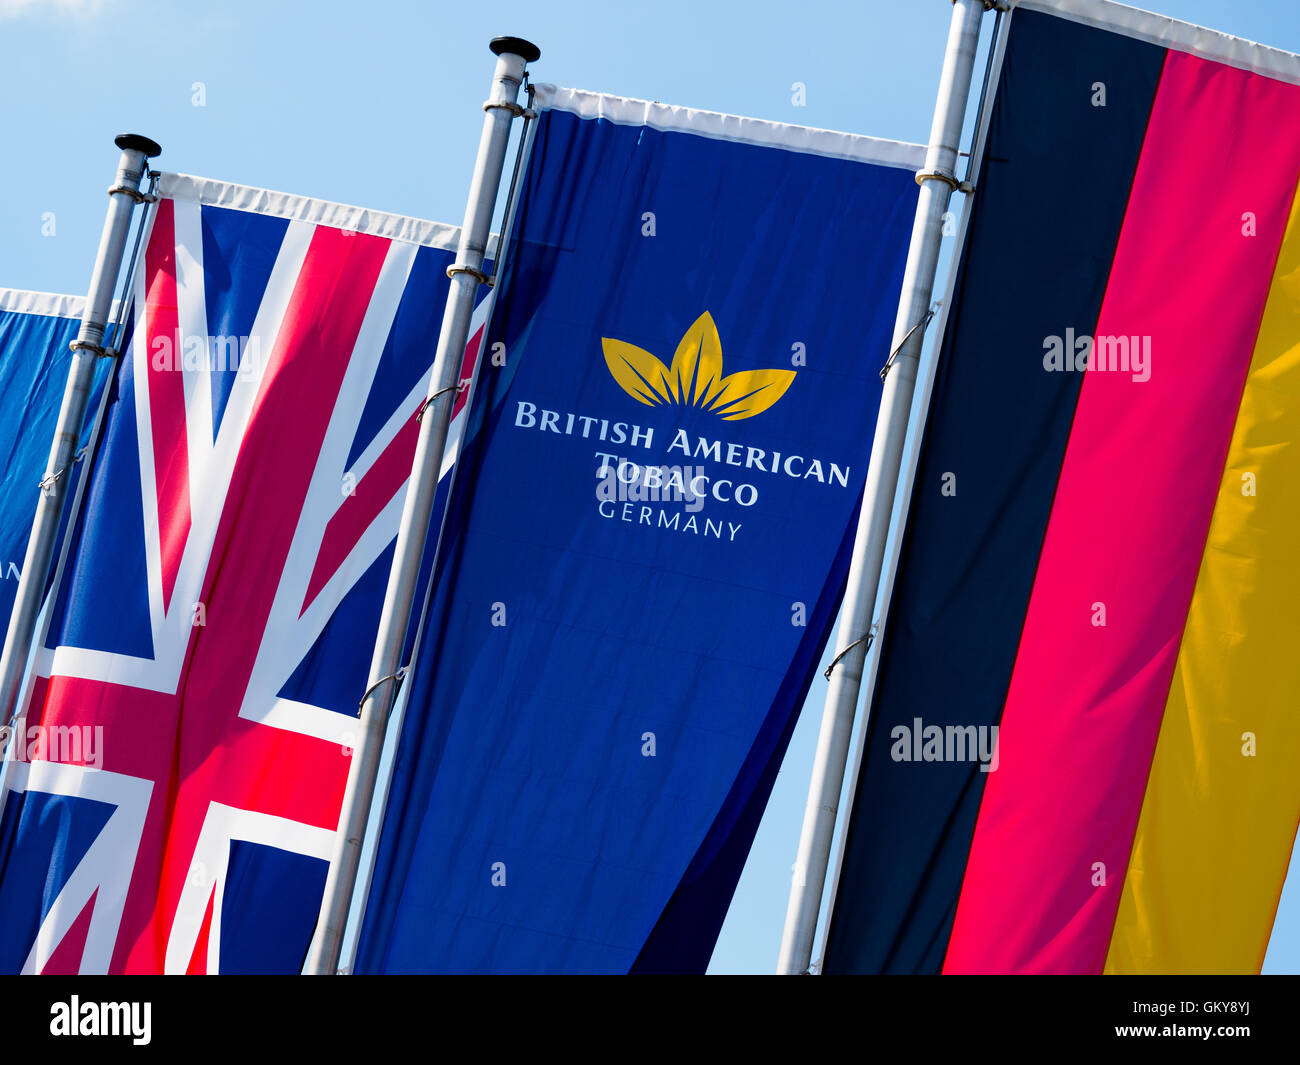 Bayreuth, Germany. 24th Aug, 2016. Between a British and a German flag is a flag with the logo of the tobacco company British American Tobacco in Bayreuth, Germany, 24 August 2016. The tobacco company plans to cut 950 positions due to heavy sales losses at Bayreuth. Photo: NICOLAS ARMER/dpa/Alamy Live News Stock Photo